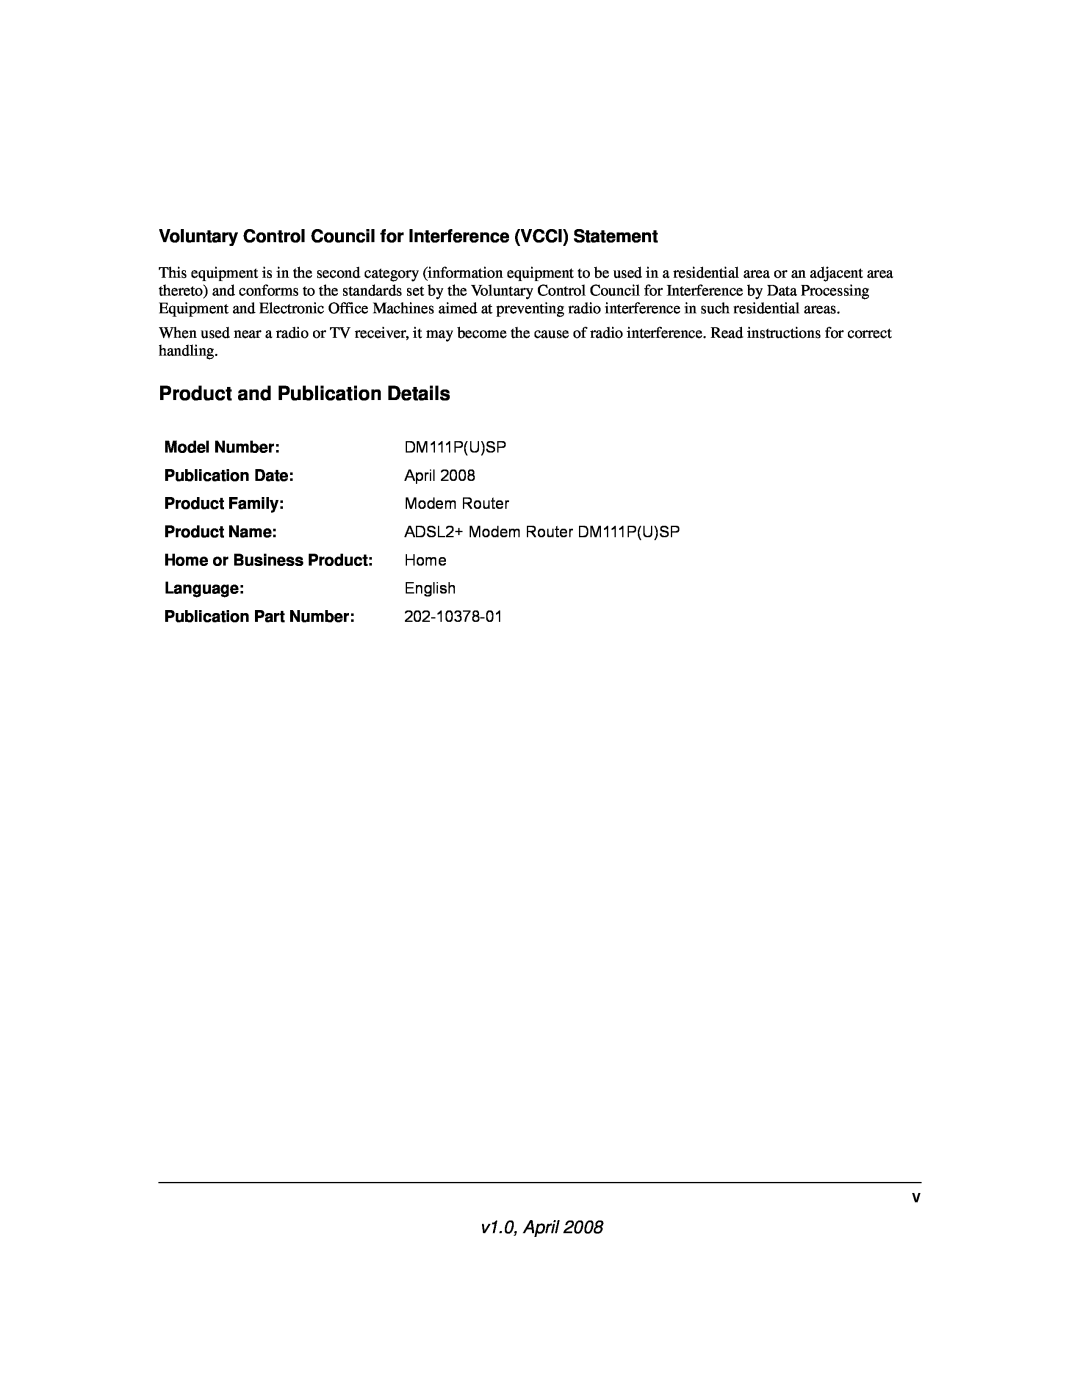 NETGEAR ADSL2+ Product and Publication Details, Voluntary Control Council for Interference VCCI Statement, v1.0, April 